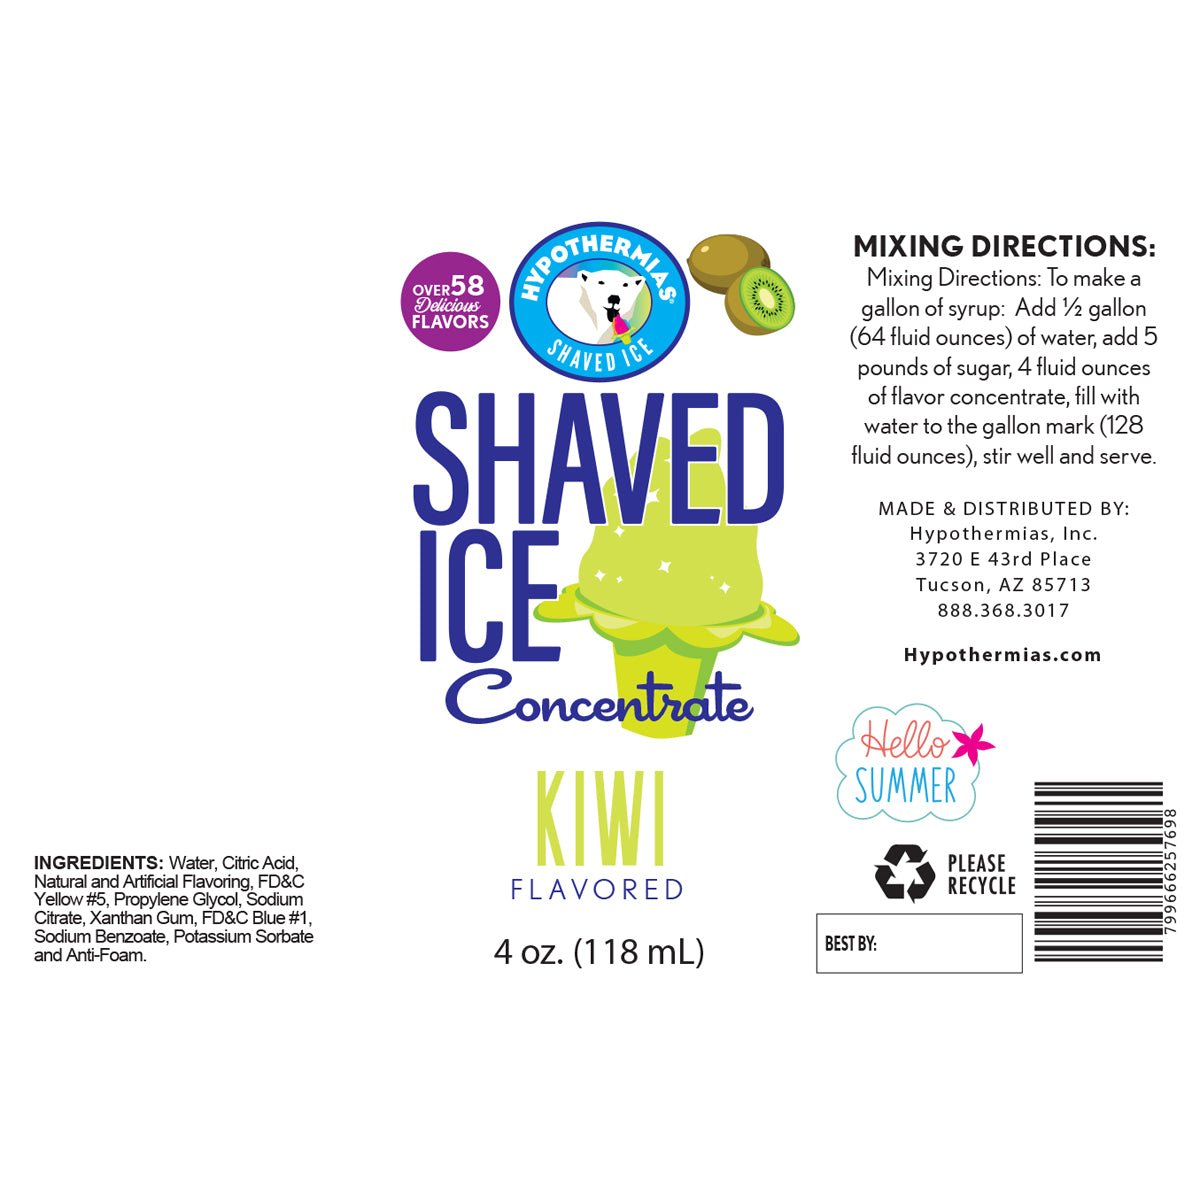 Hypothermias kiwi shaved ice or snow cone flavor syrup concentrate ingredient label.